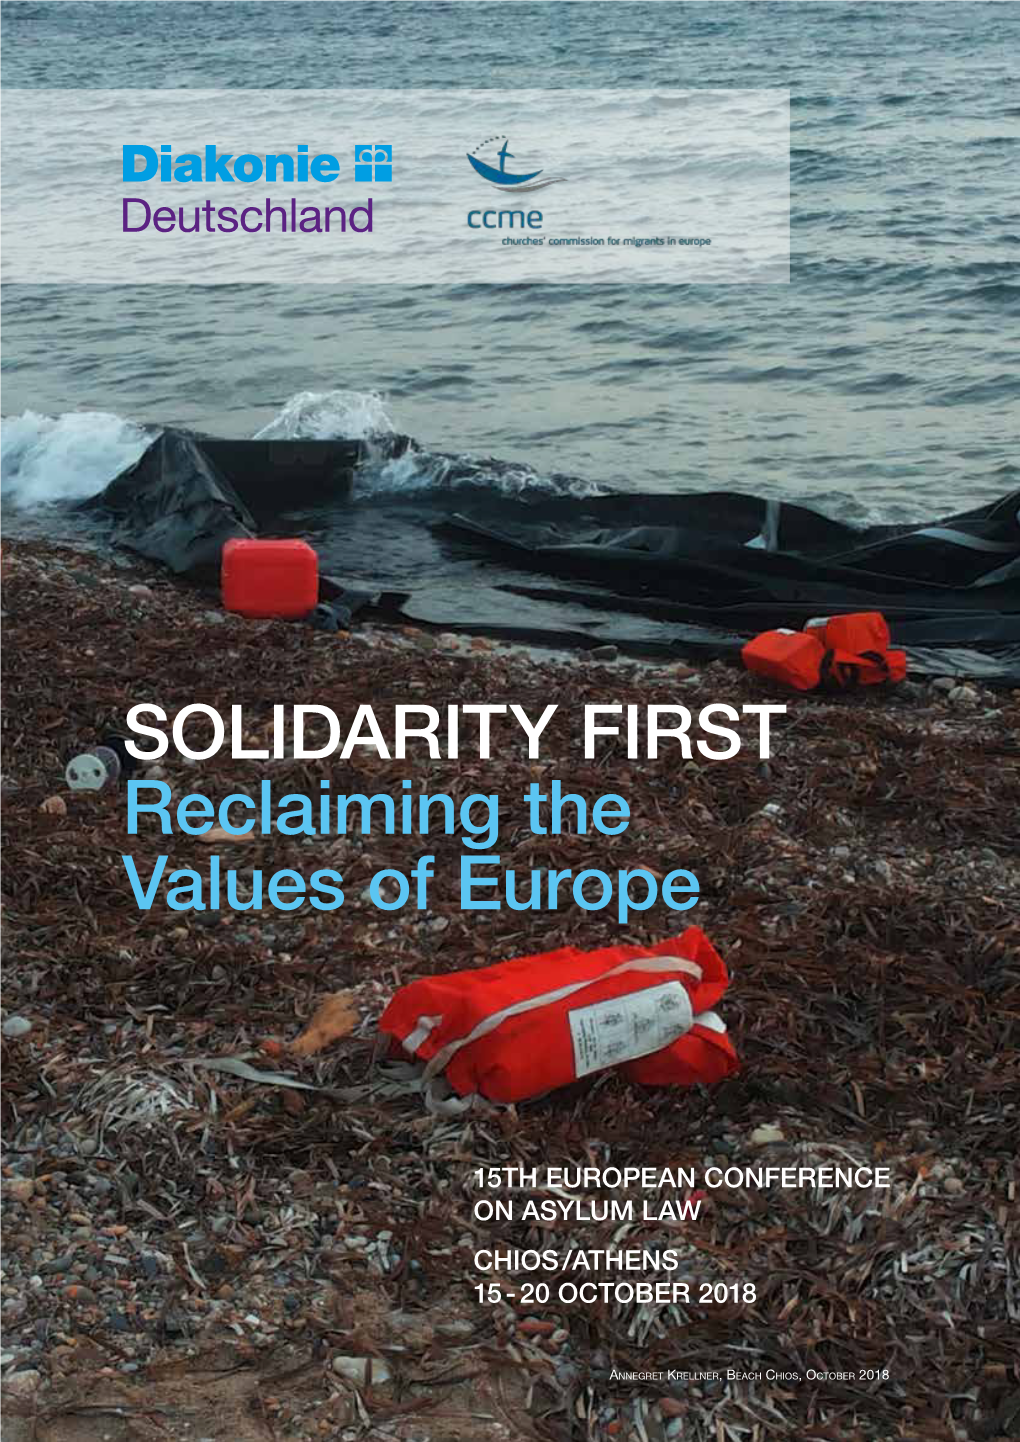 SOLIDARITY FIRST, Reclaiming the Values of Europe; 15 Th European